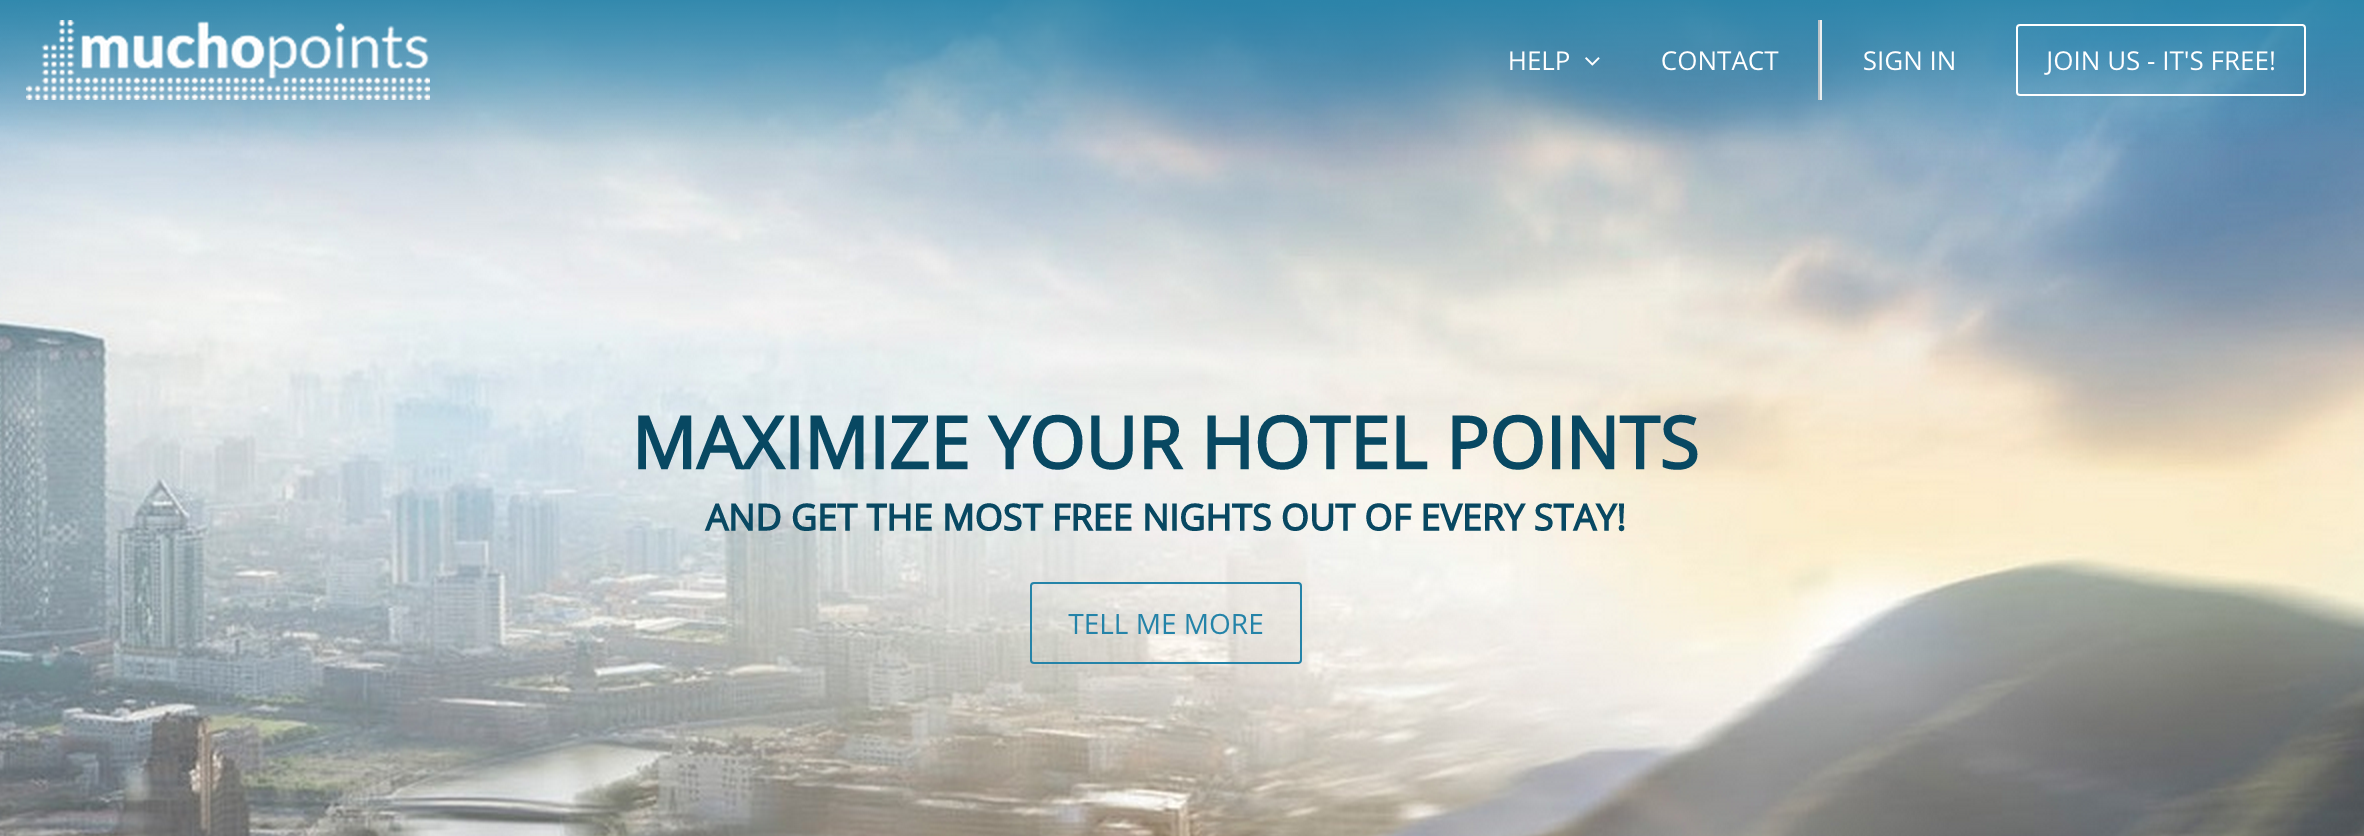 muchopoints – are you maximizing your hotel points?